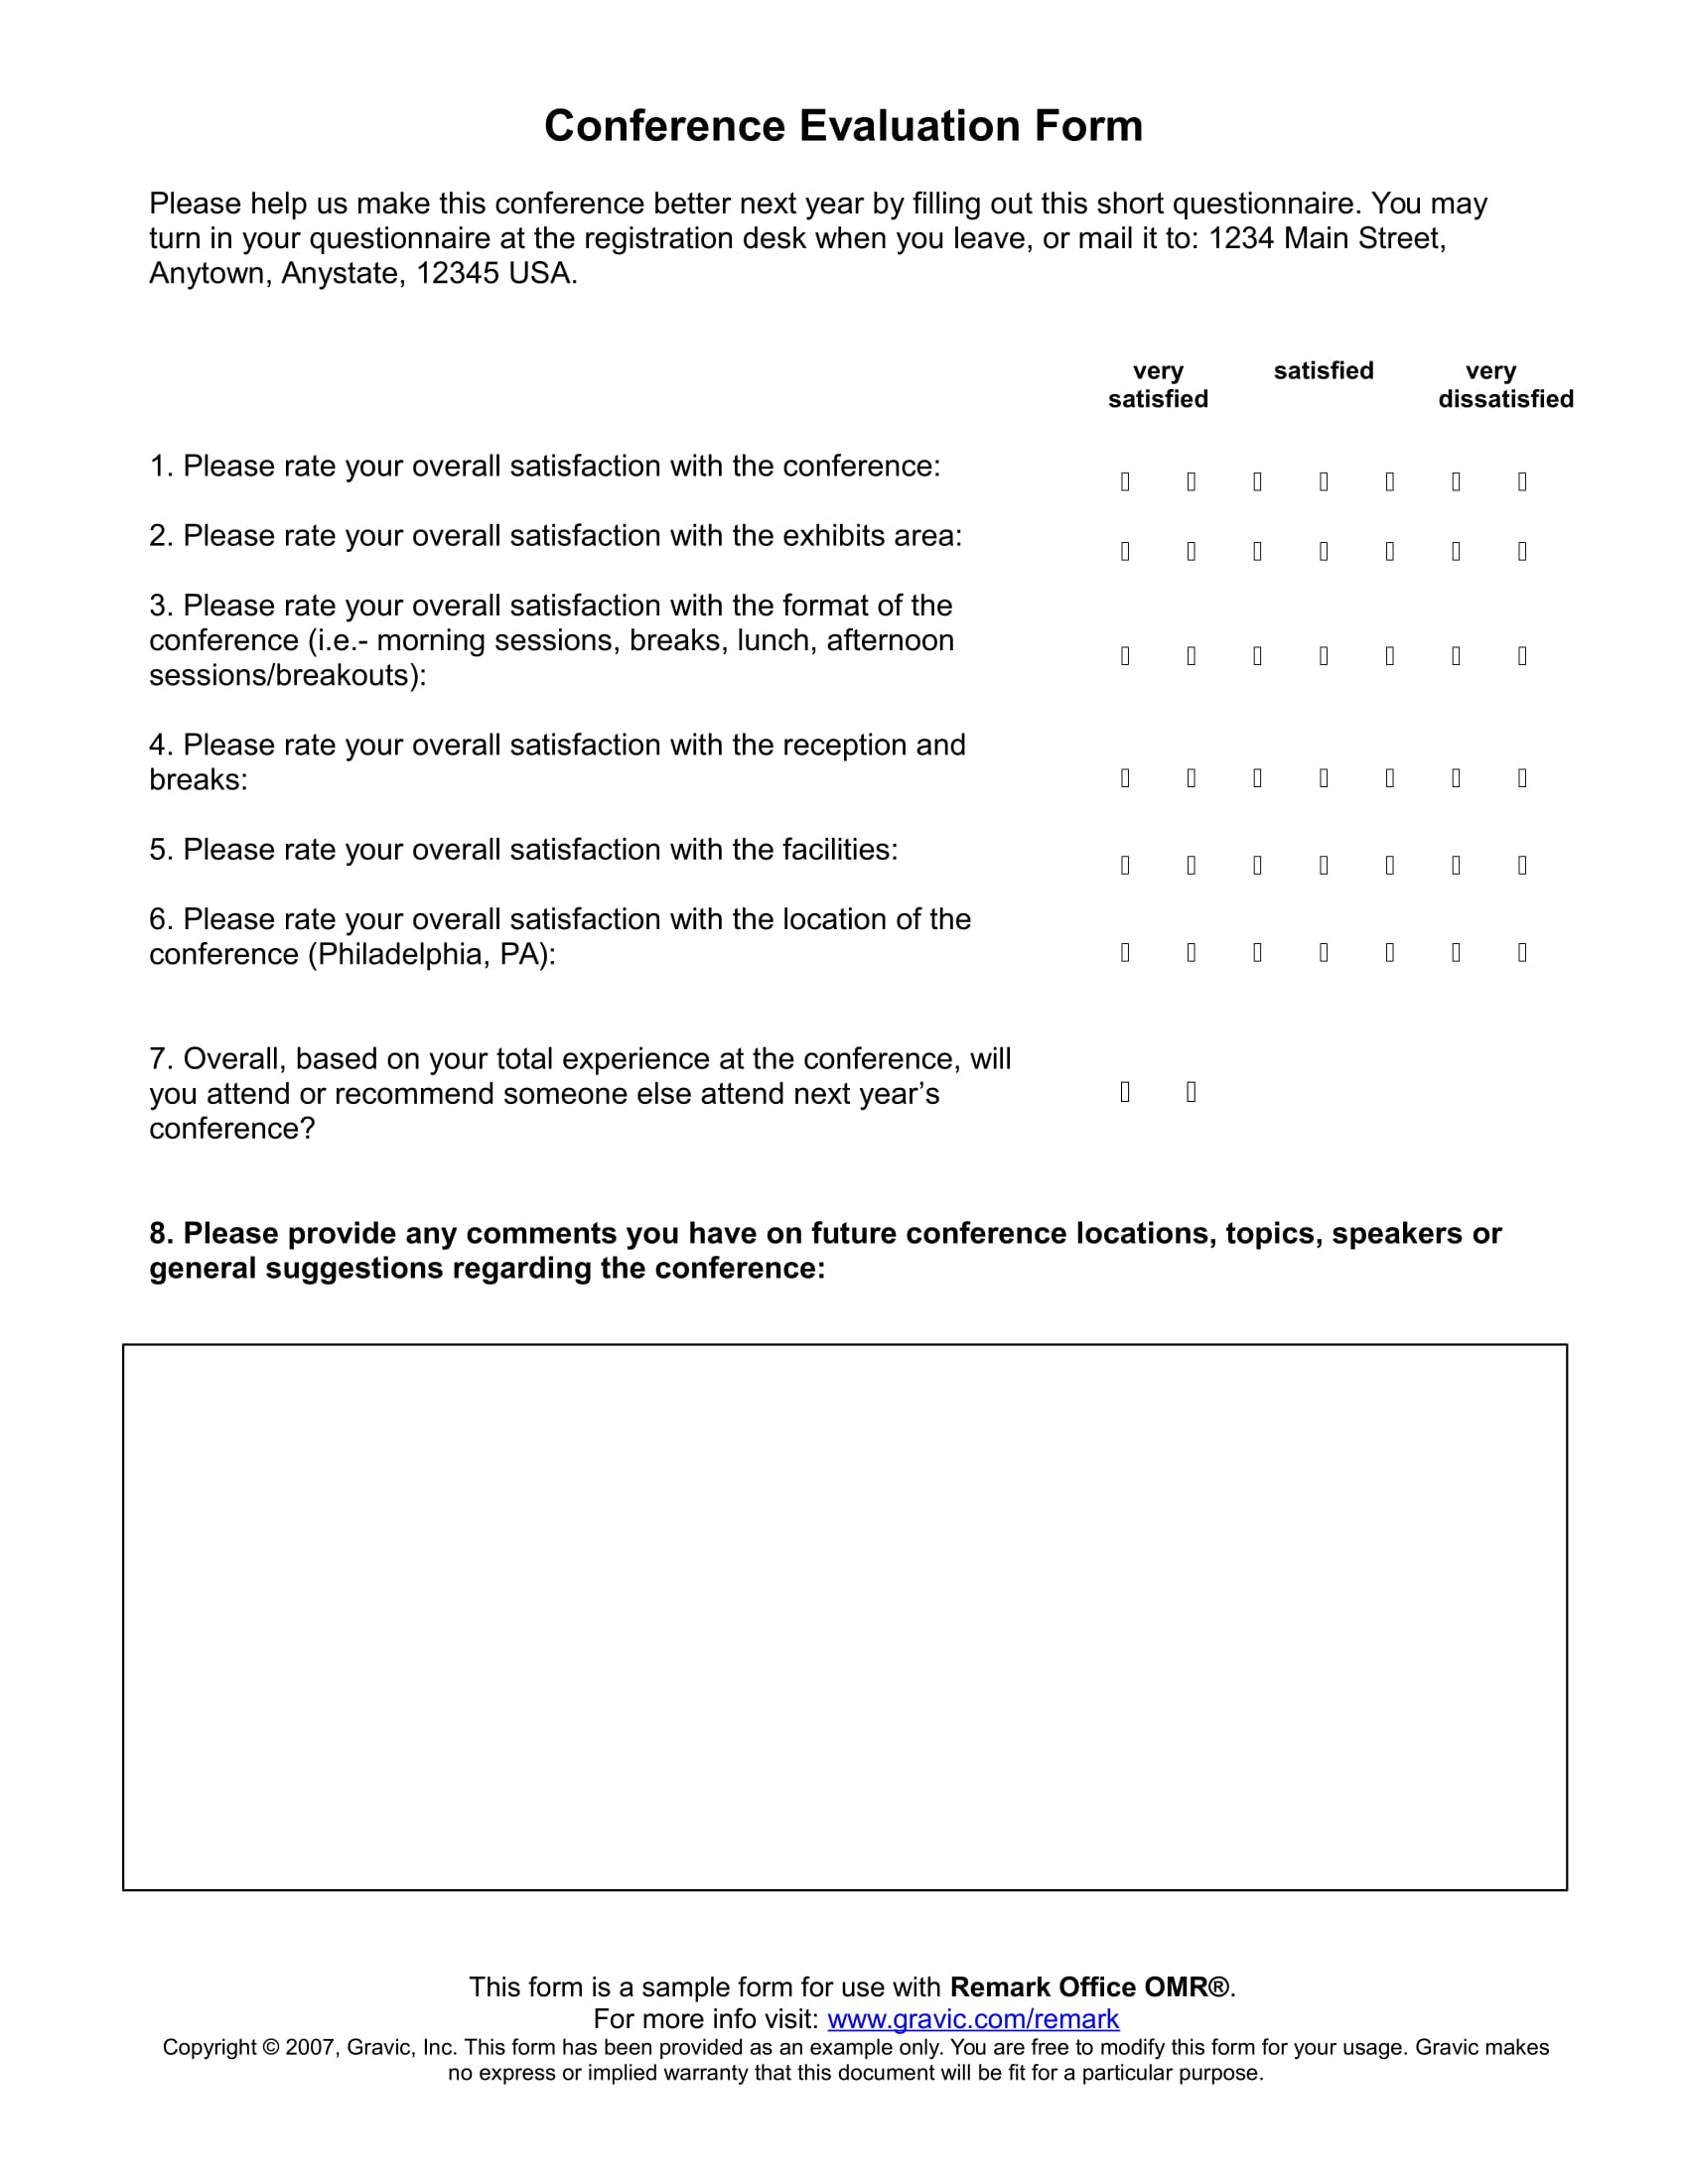 Conference Evaluation Survey Form Example